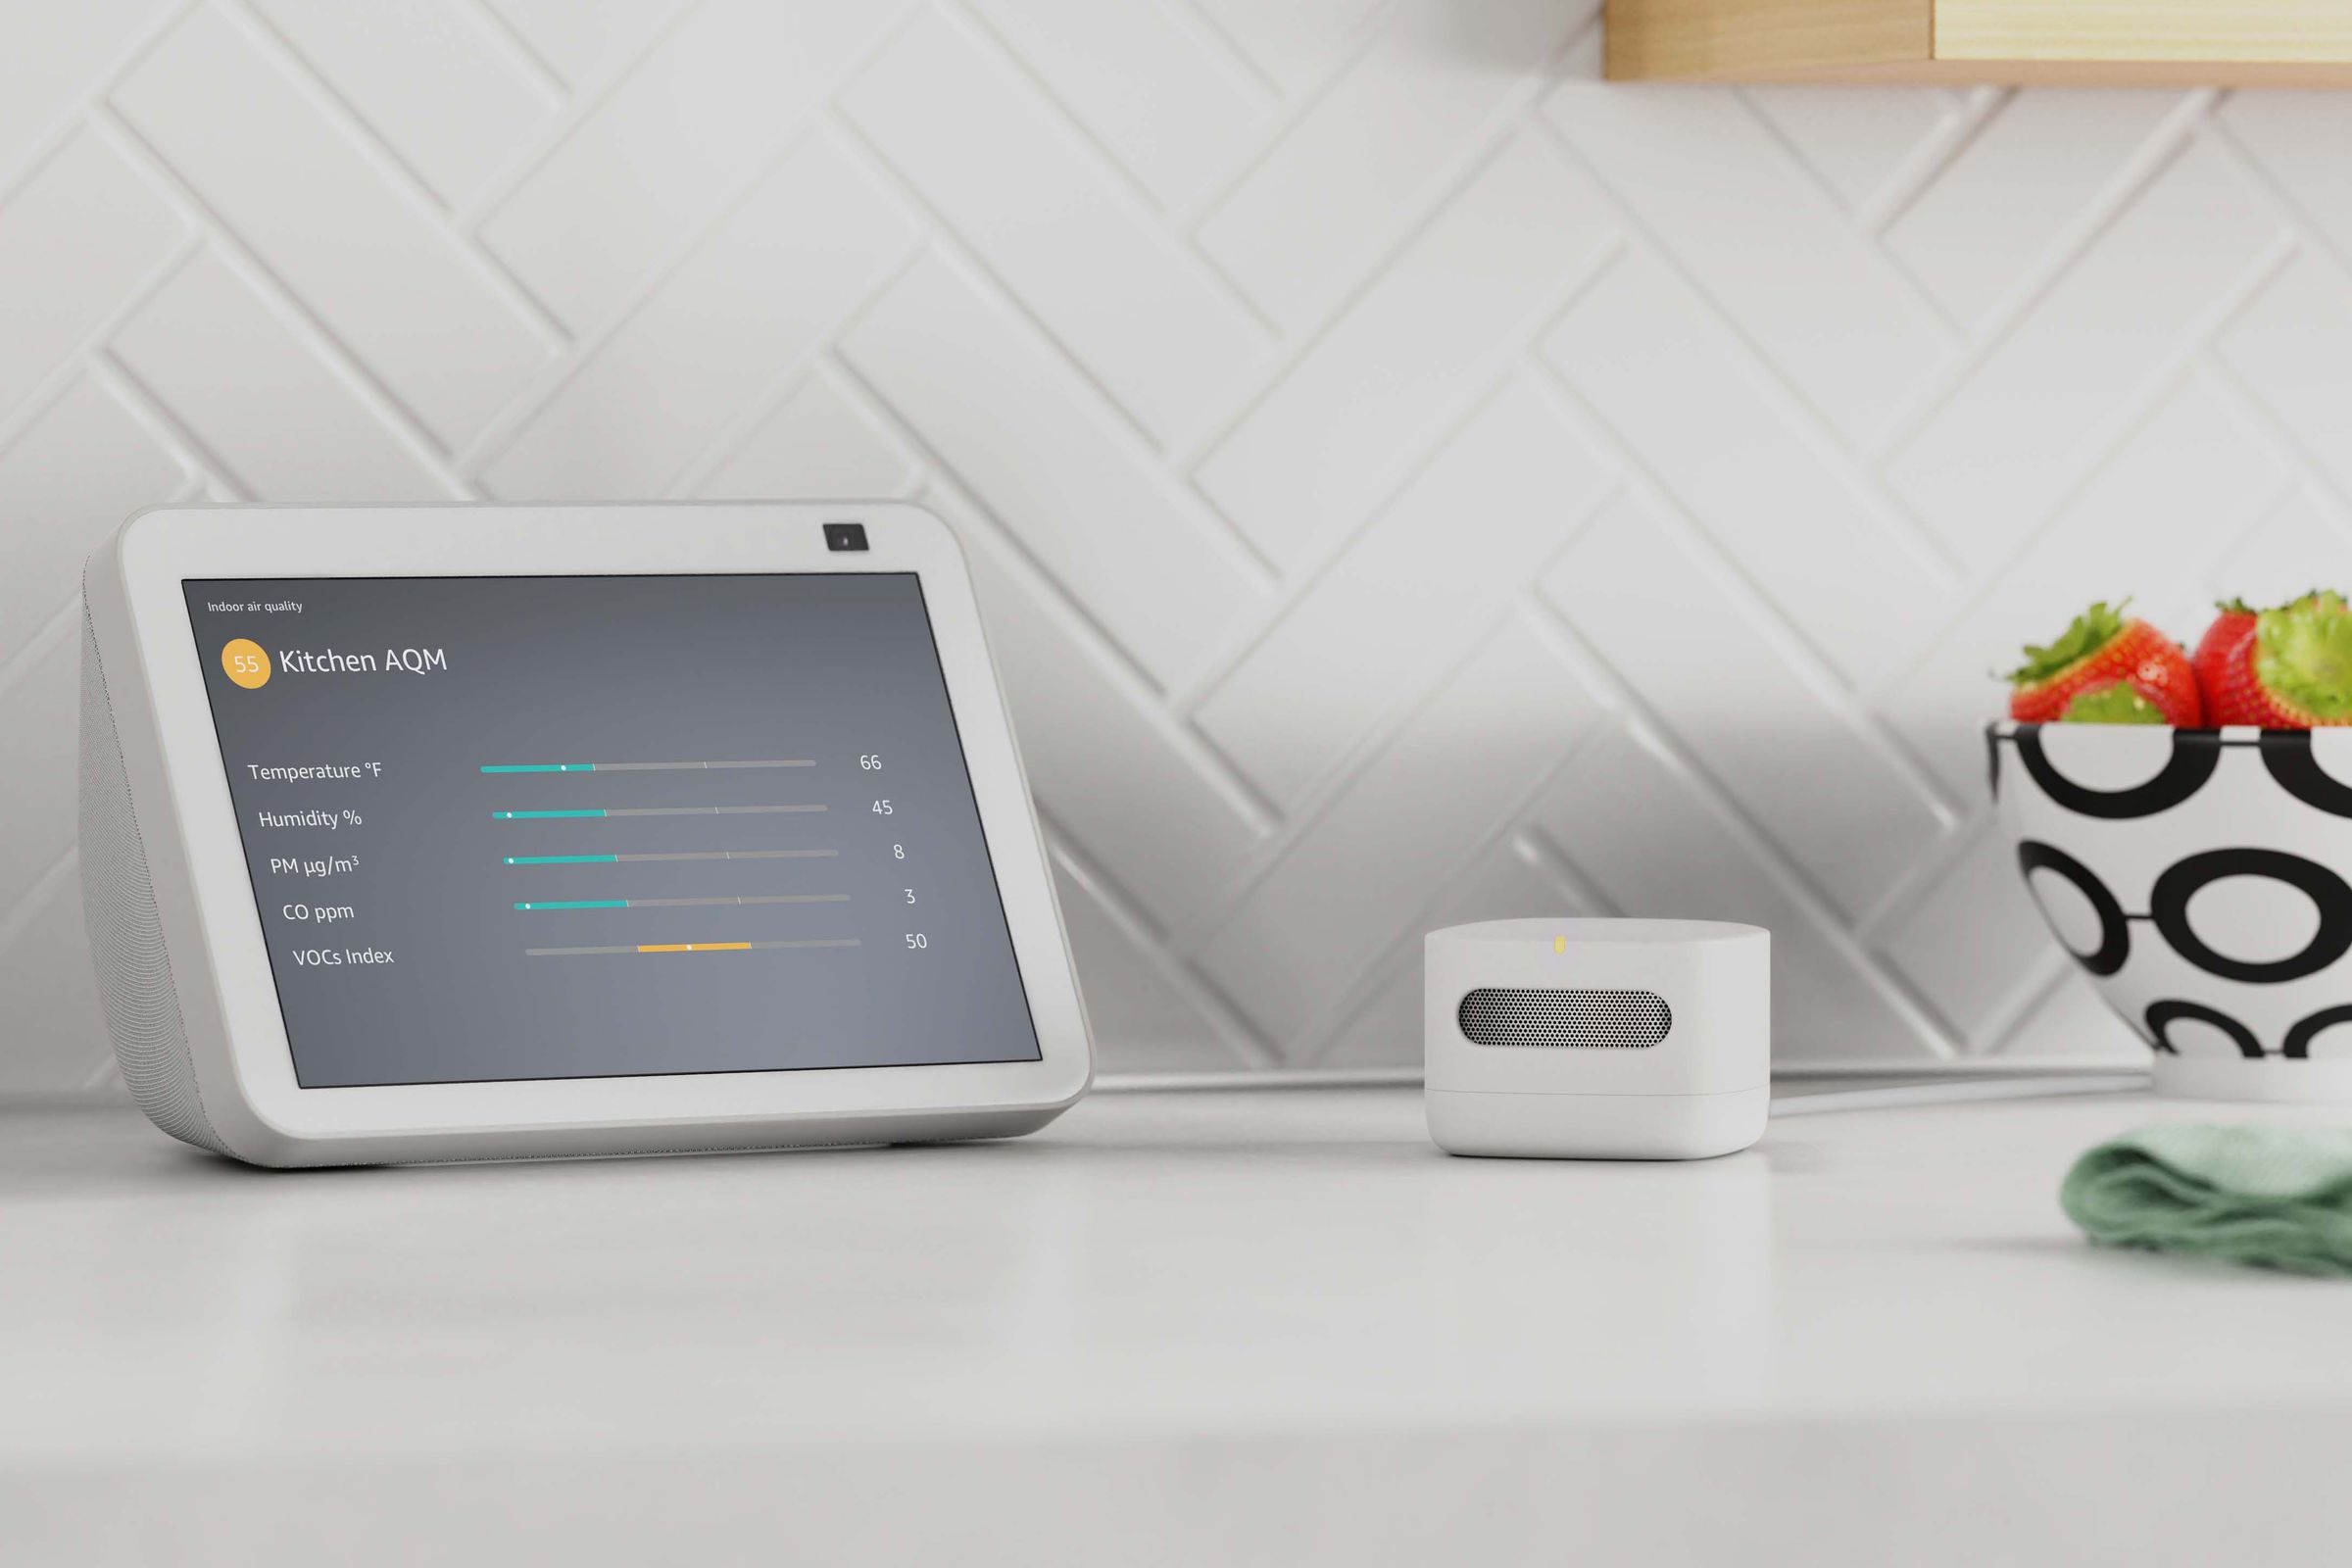 The air quality monitor (right) can show information on Echo Show devices. 